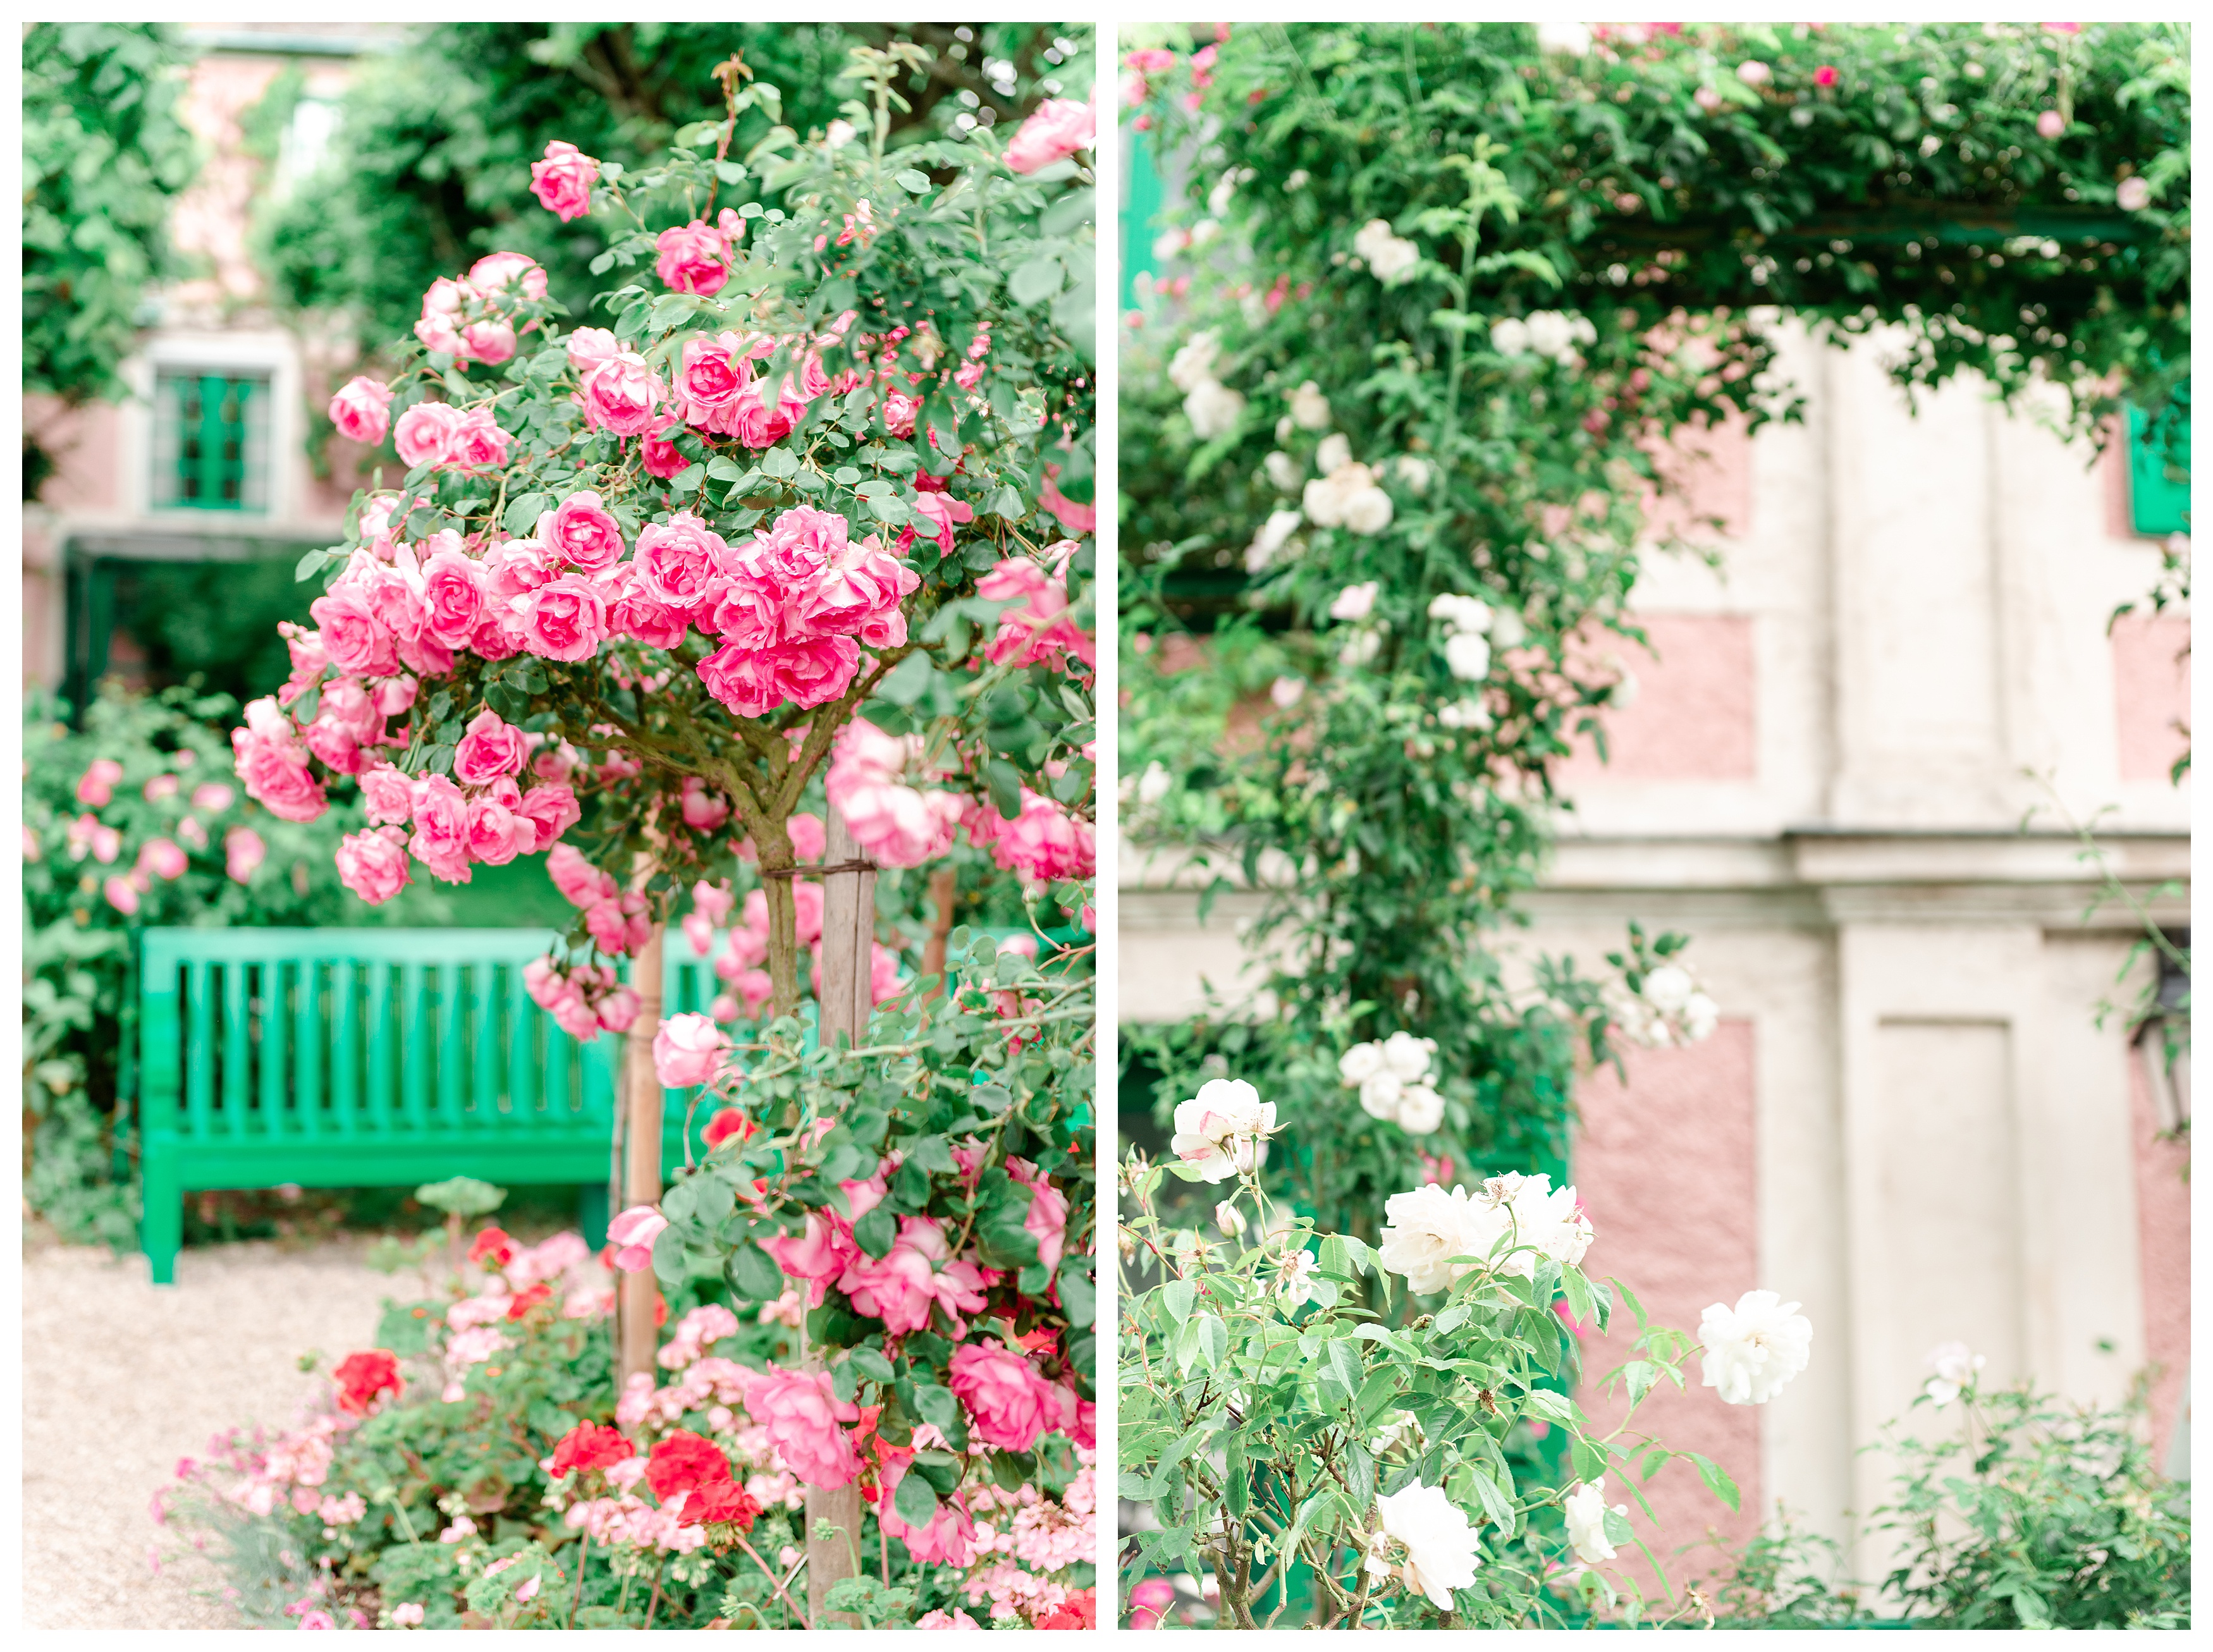 monet's garden is overrun by roses of all colors from pink to white